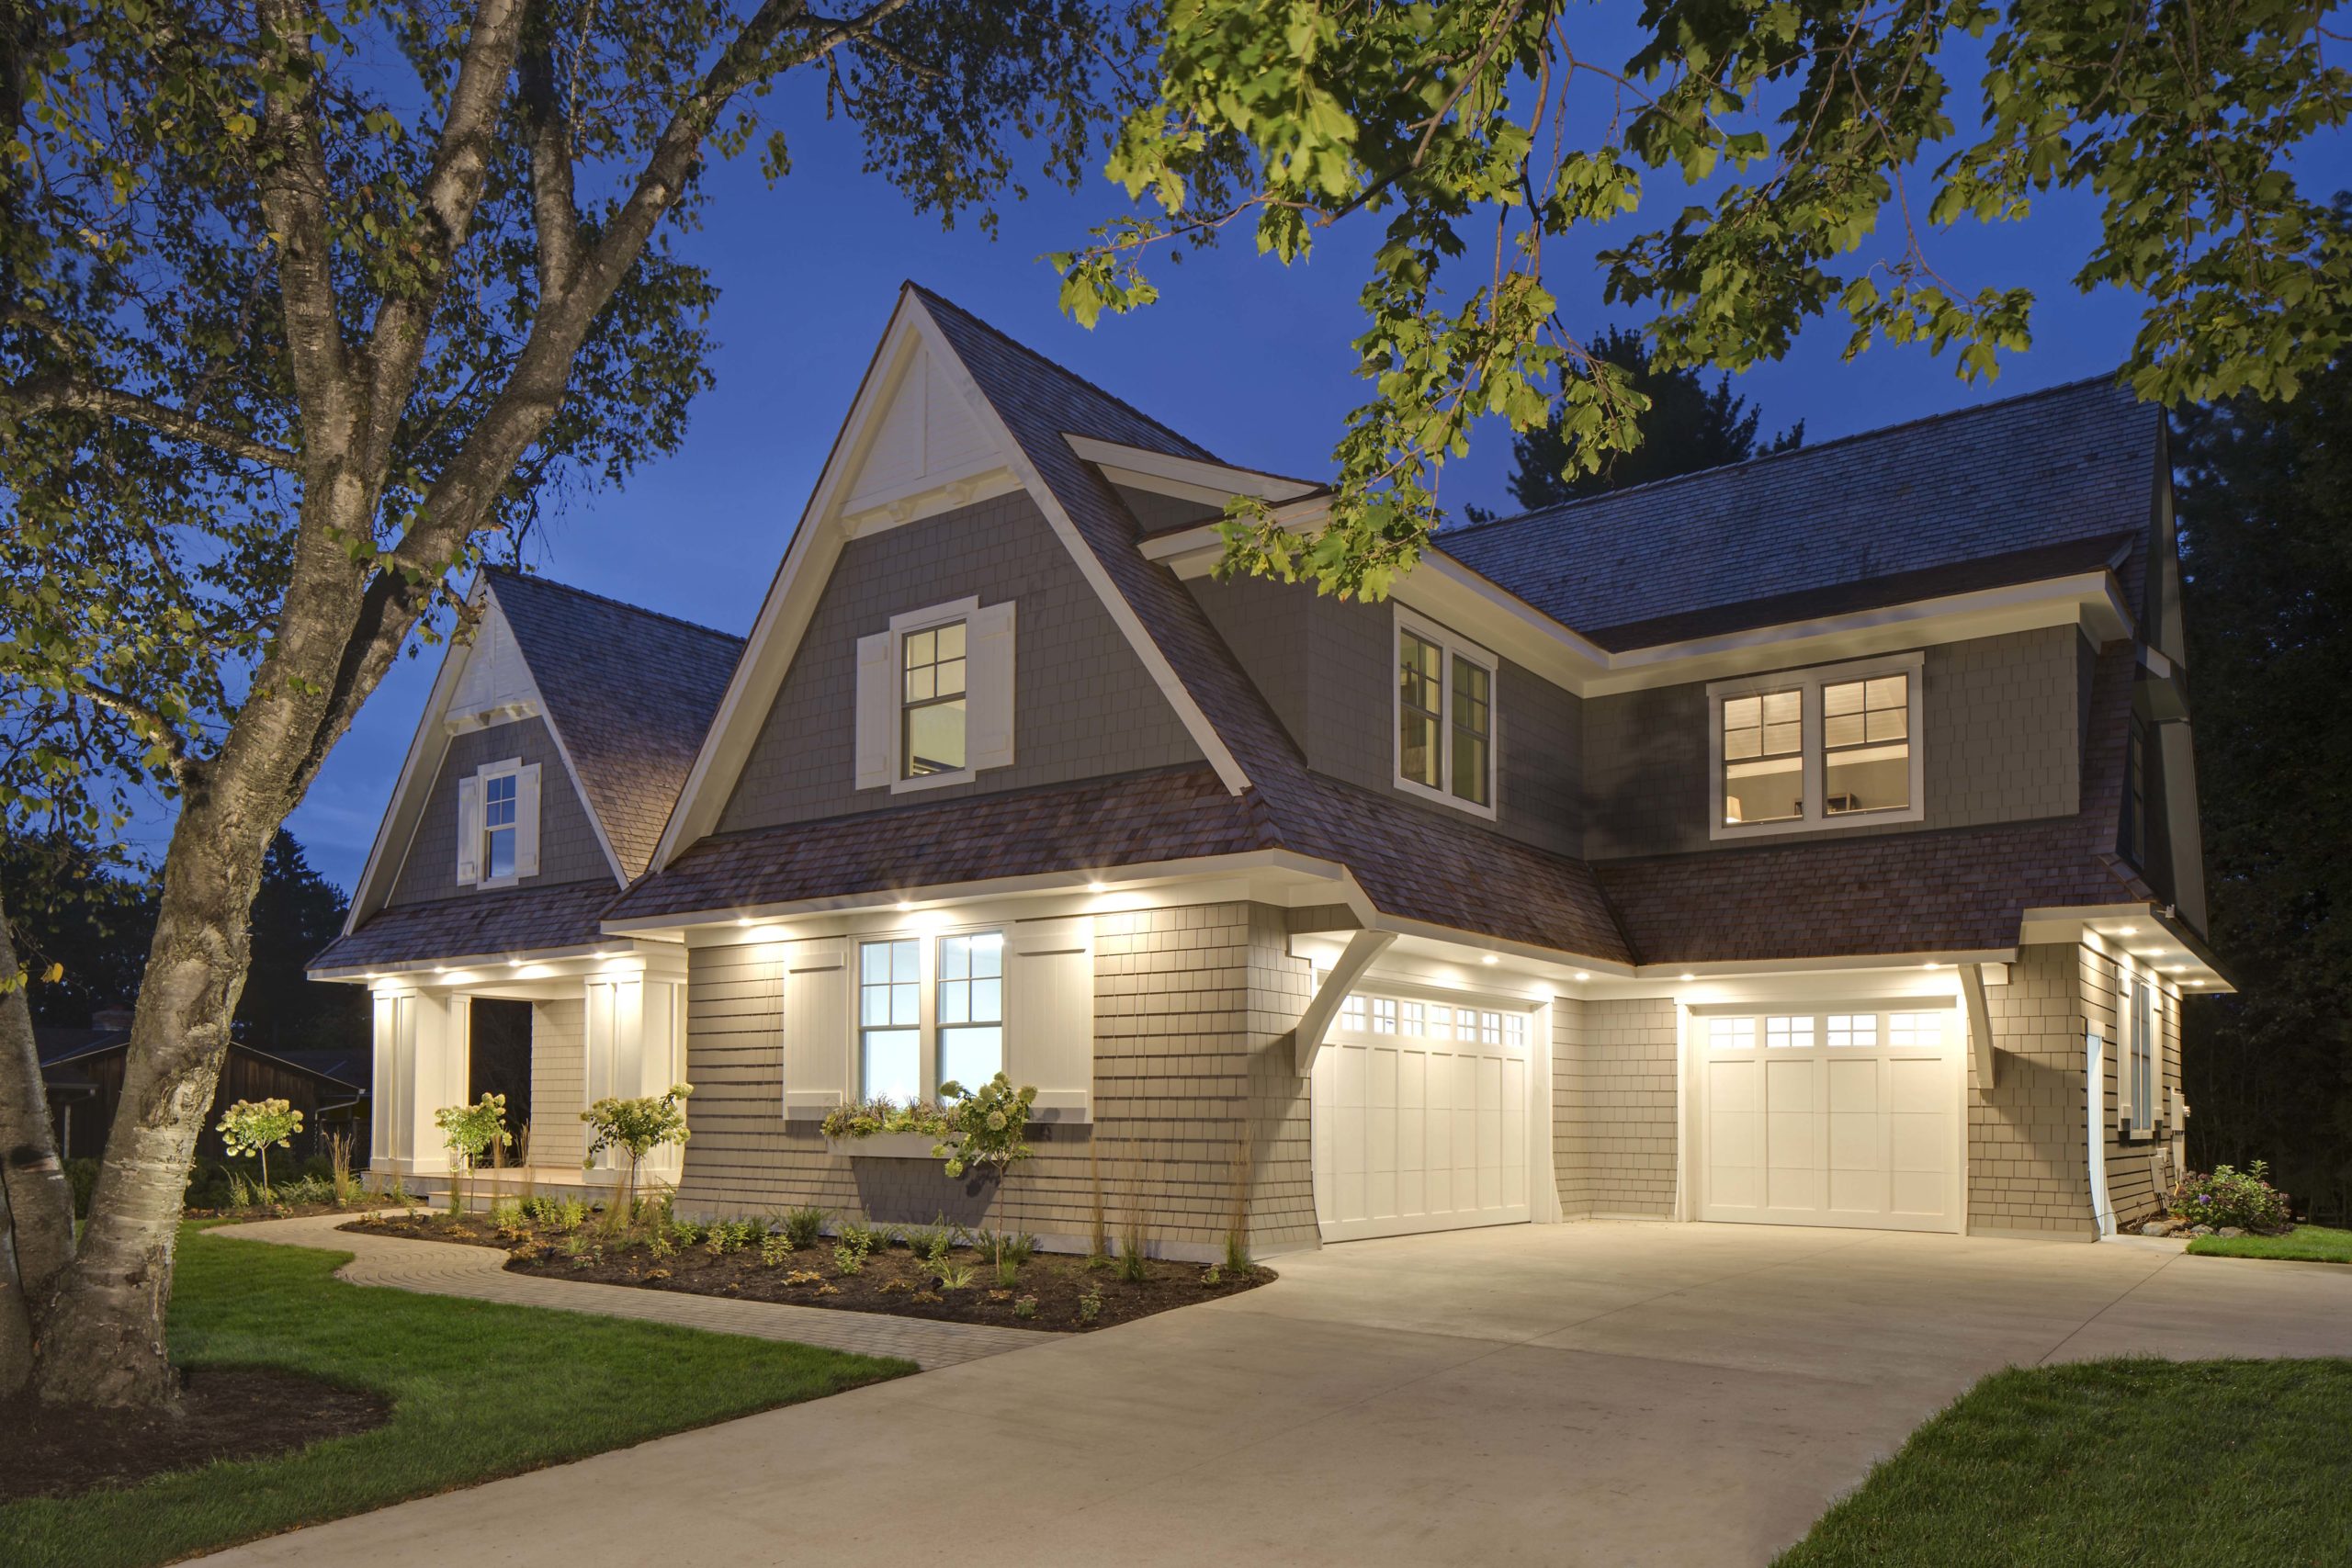 A home with two garages and a driveway at night.